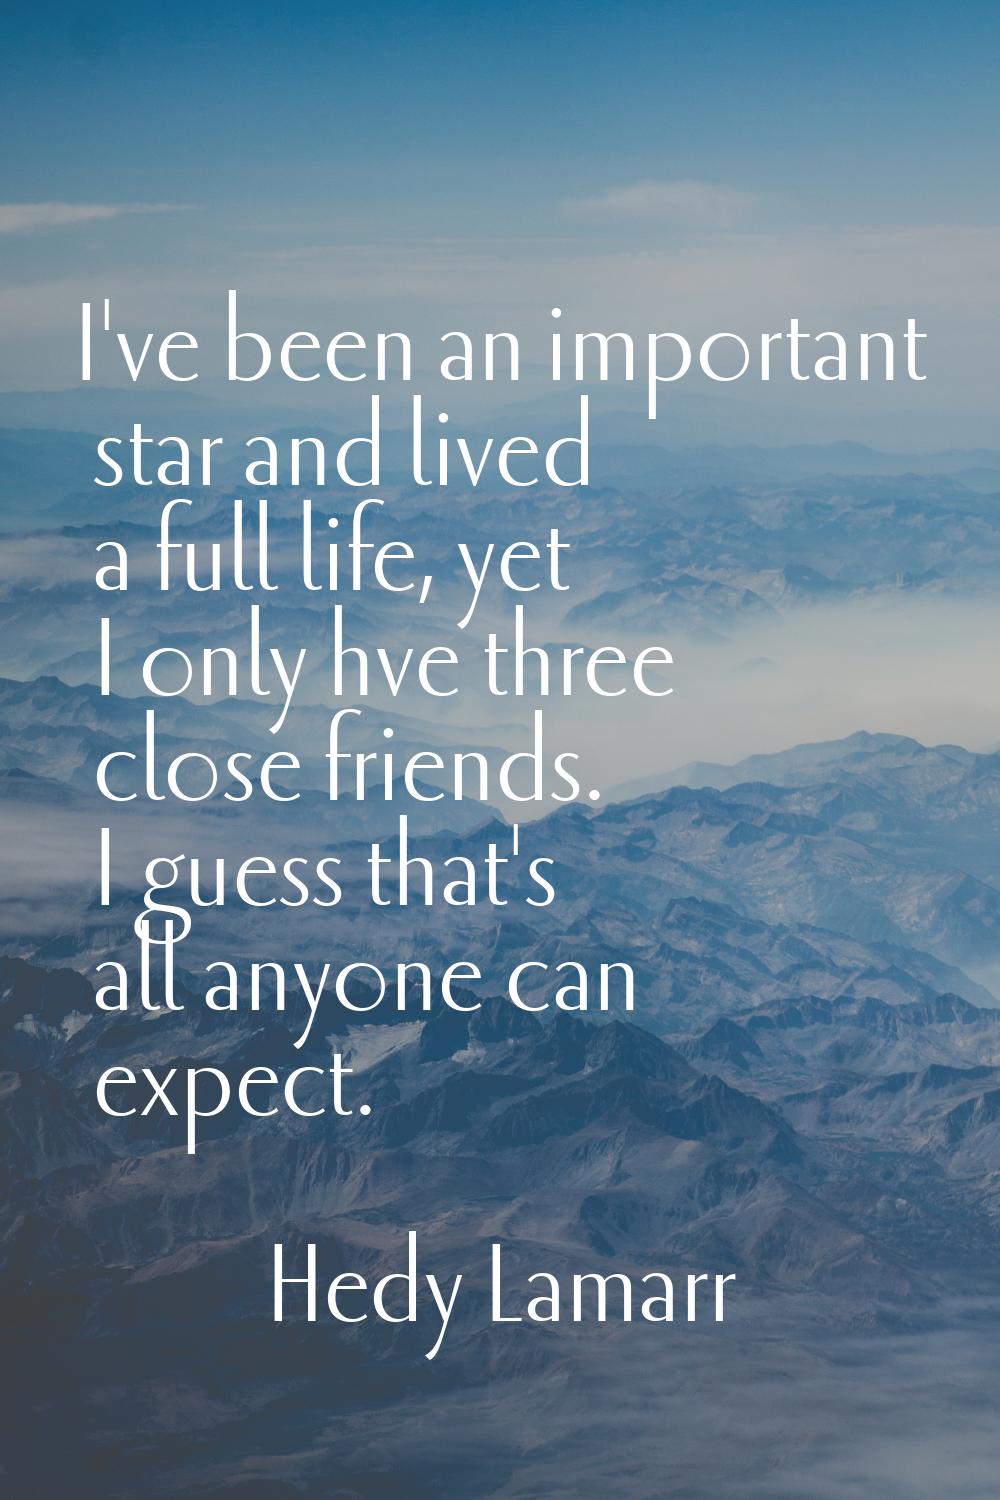 I've been an important star and lived a full life, yet I only hve three close friends. I guess that